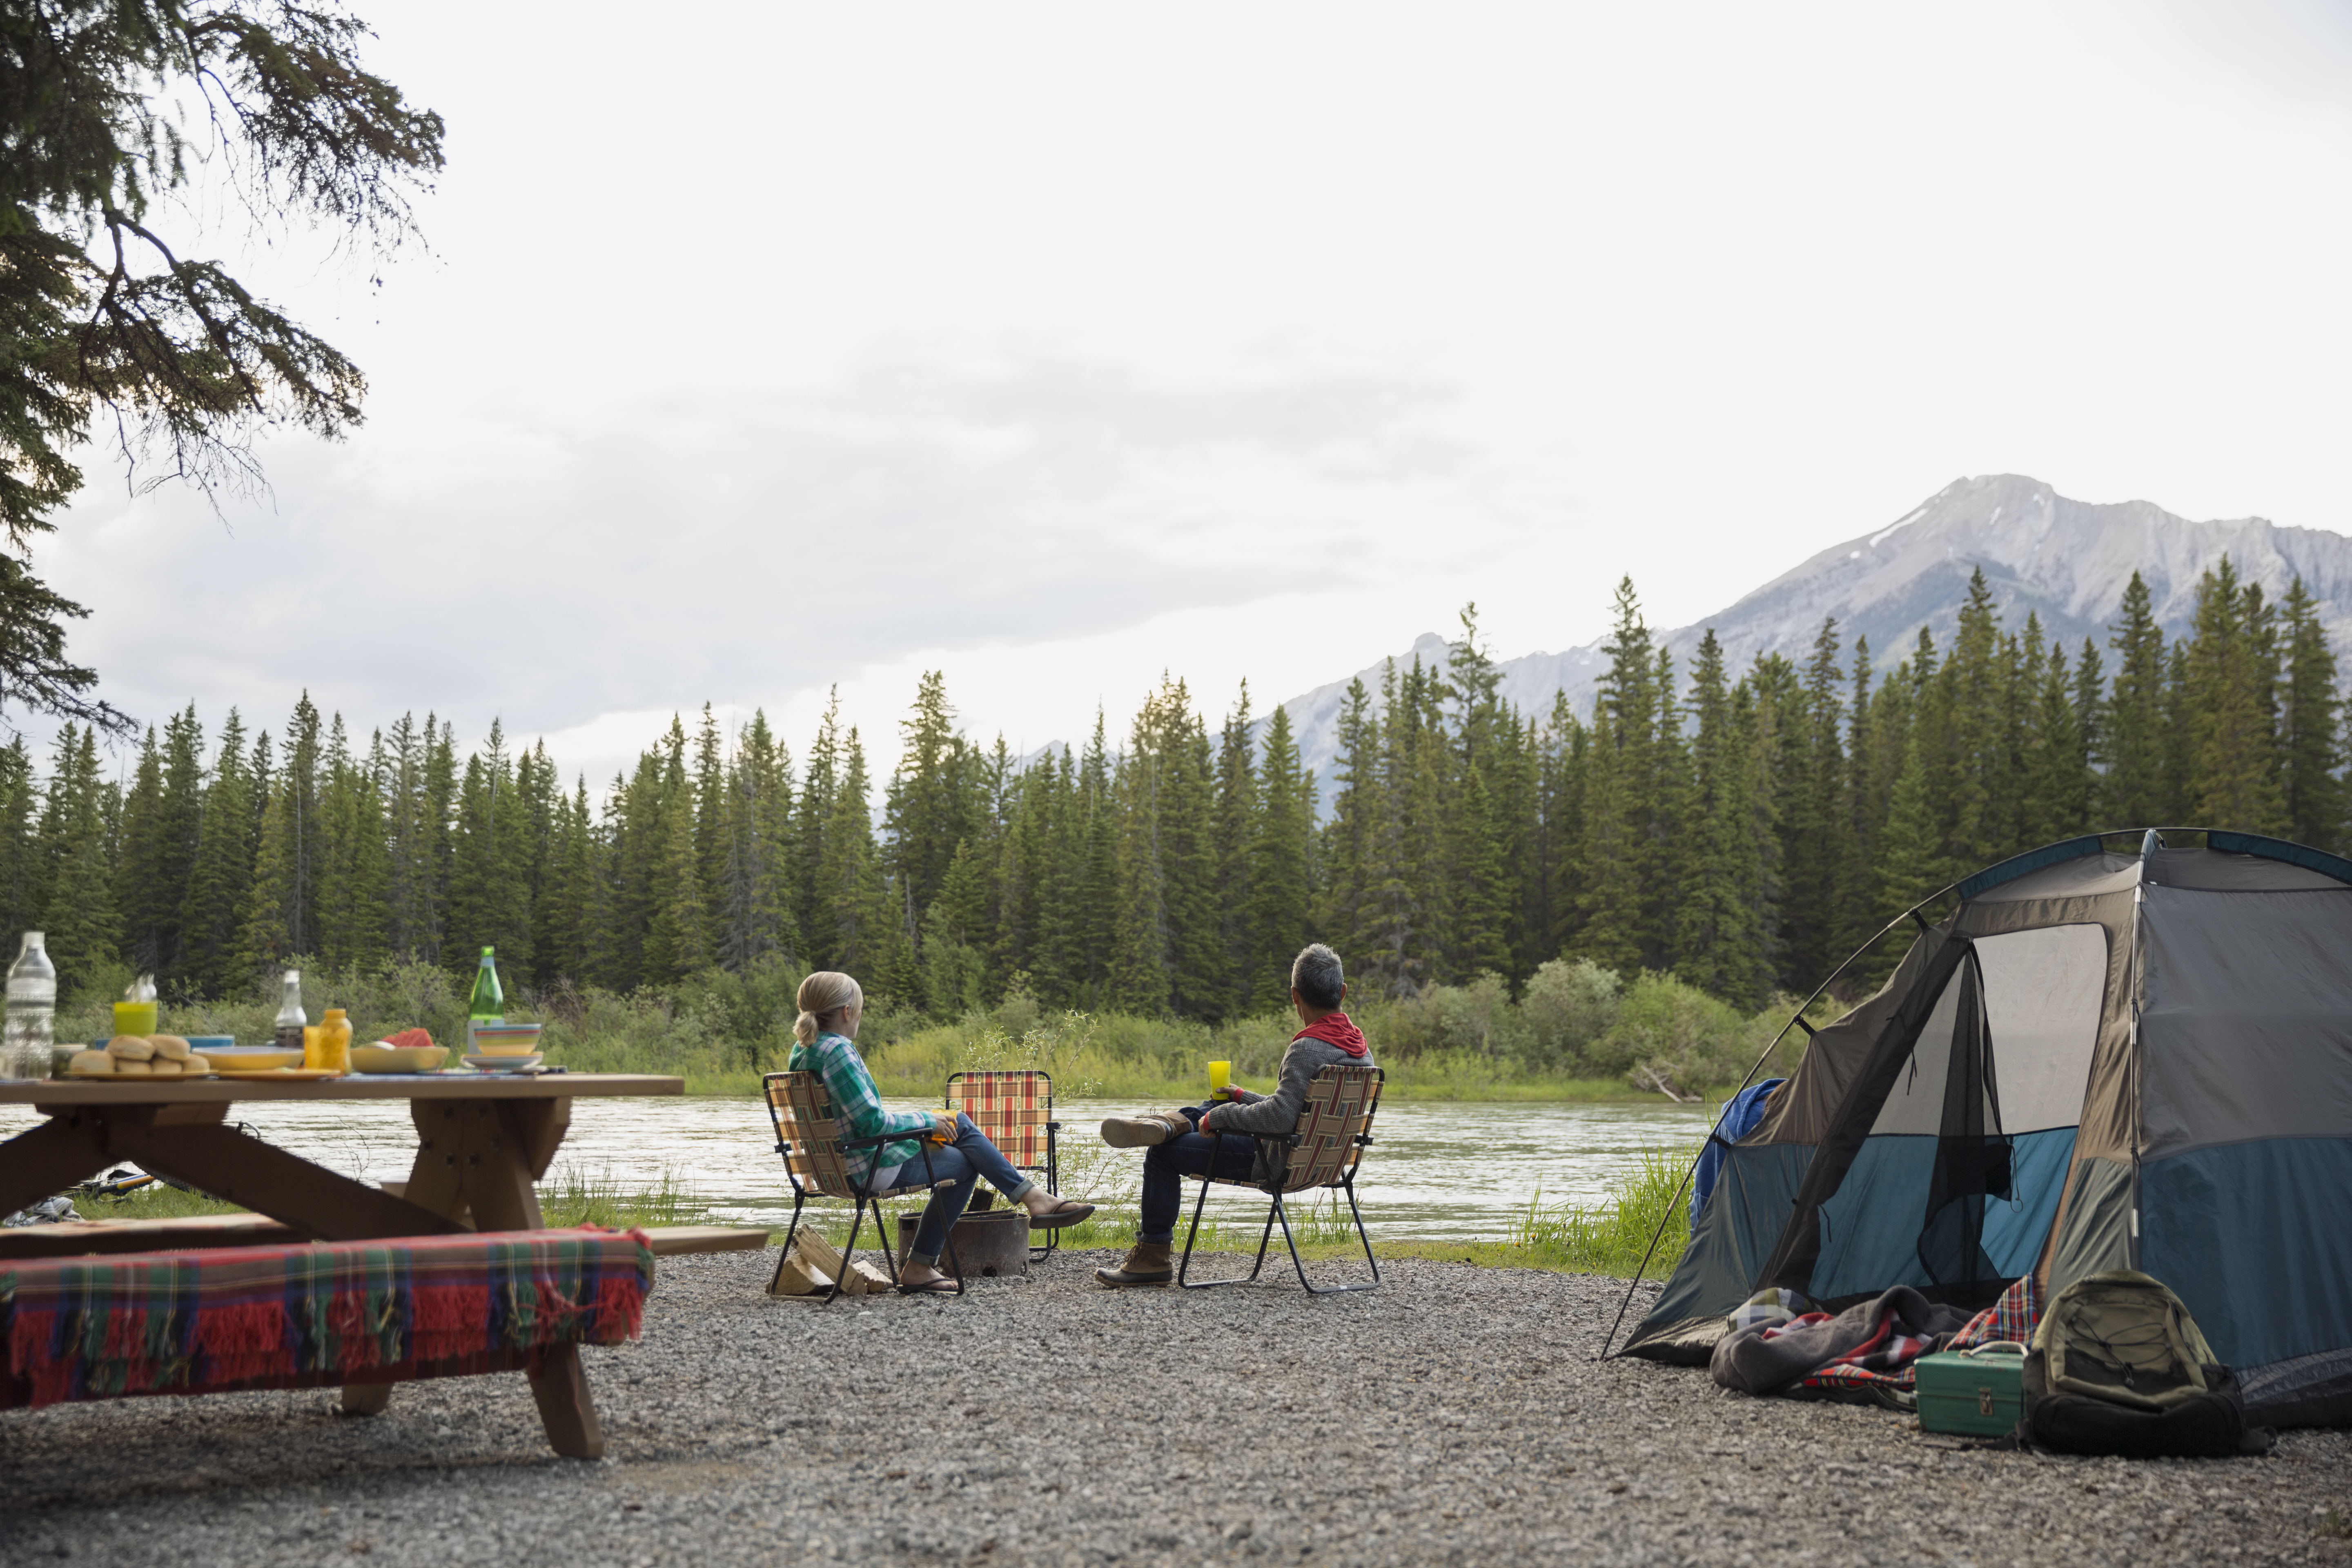 Go Ahead, Feed the Bears—and 9 More Ways to Have the Worst Camping Trip Ever